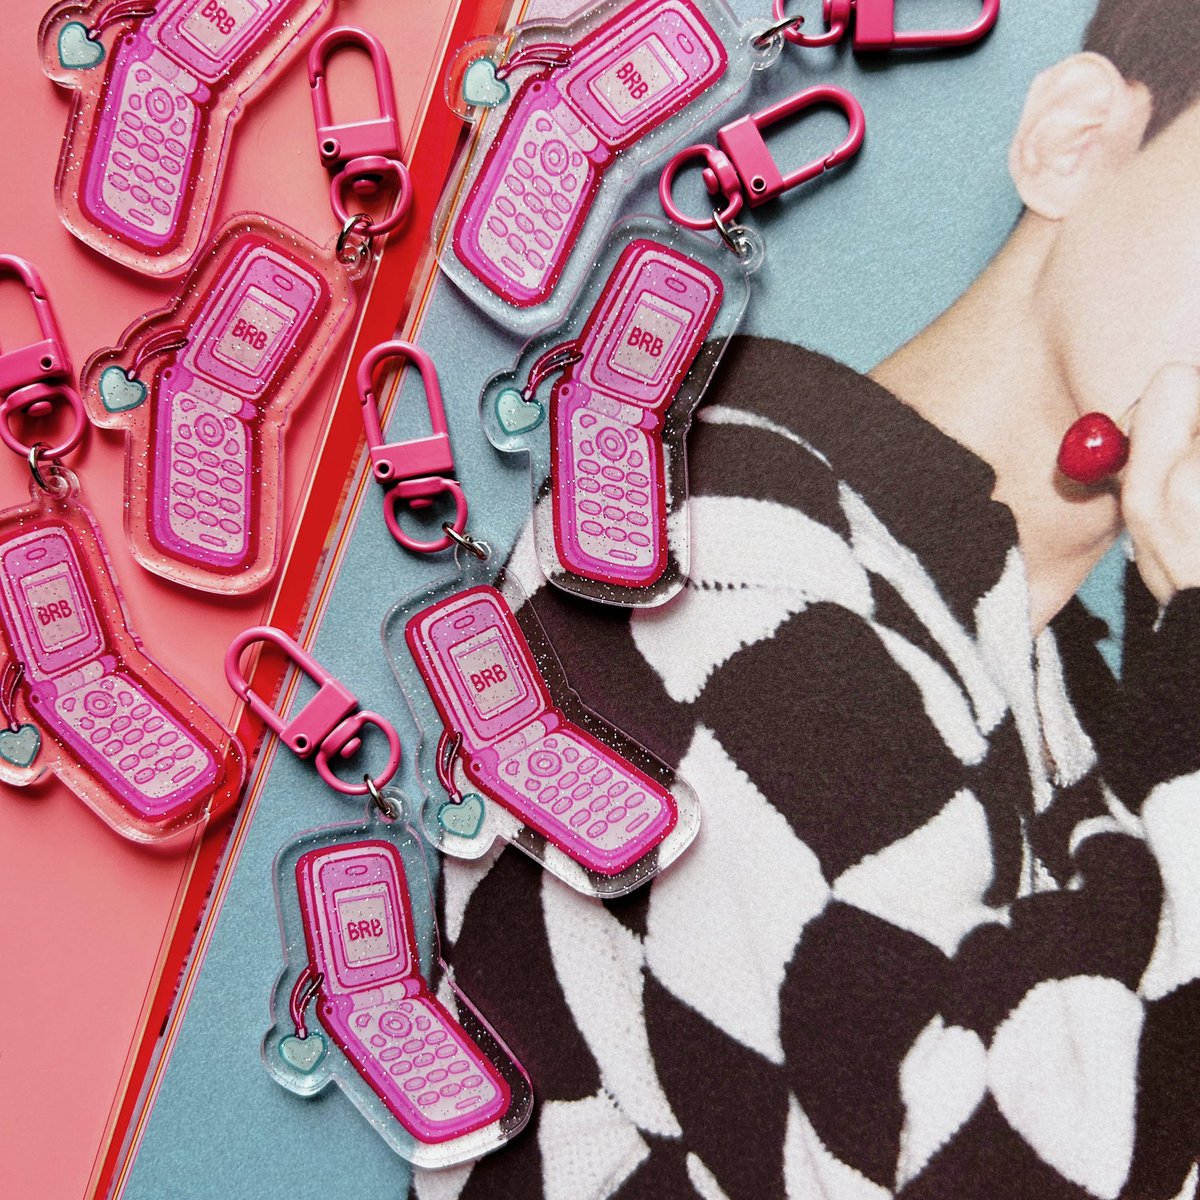 brb phone charms 💗 